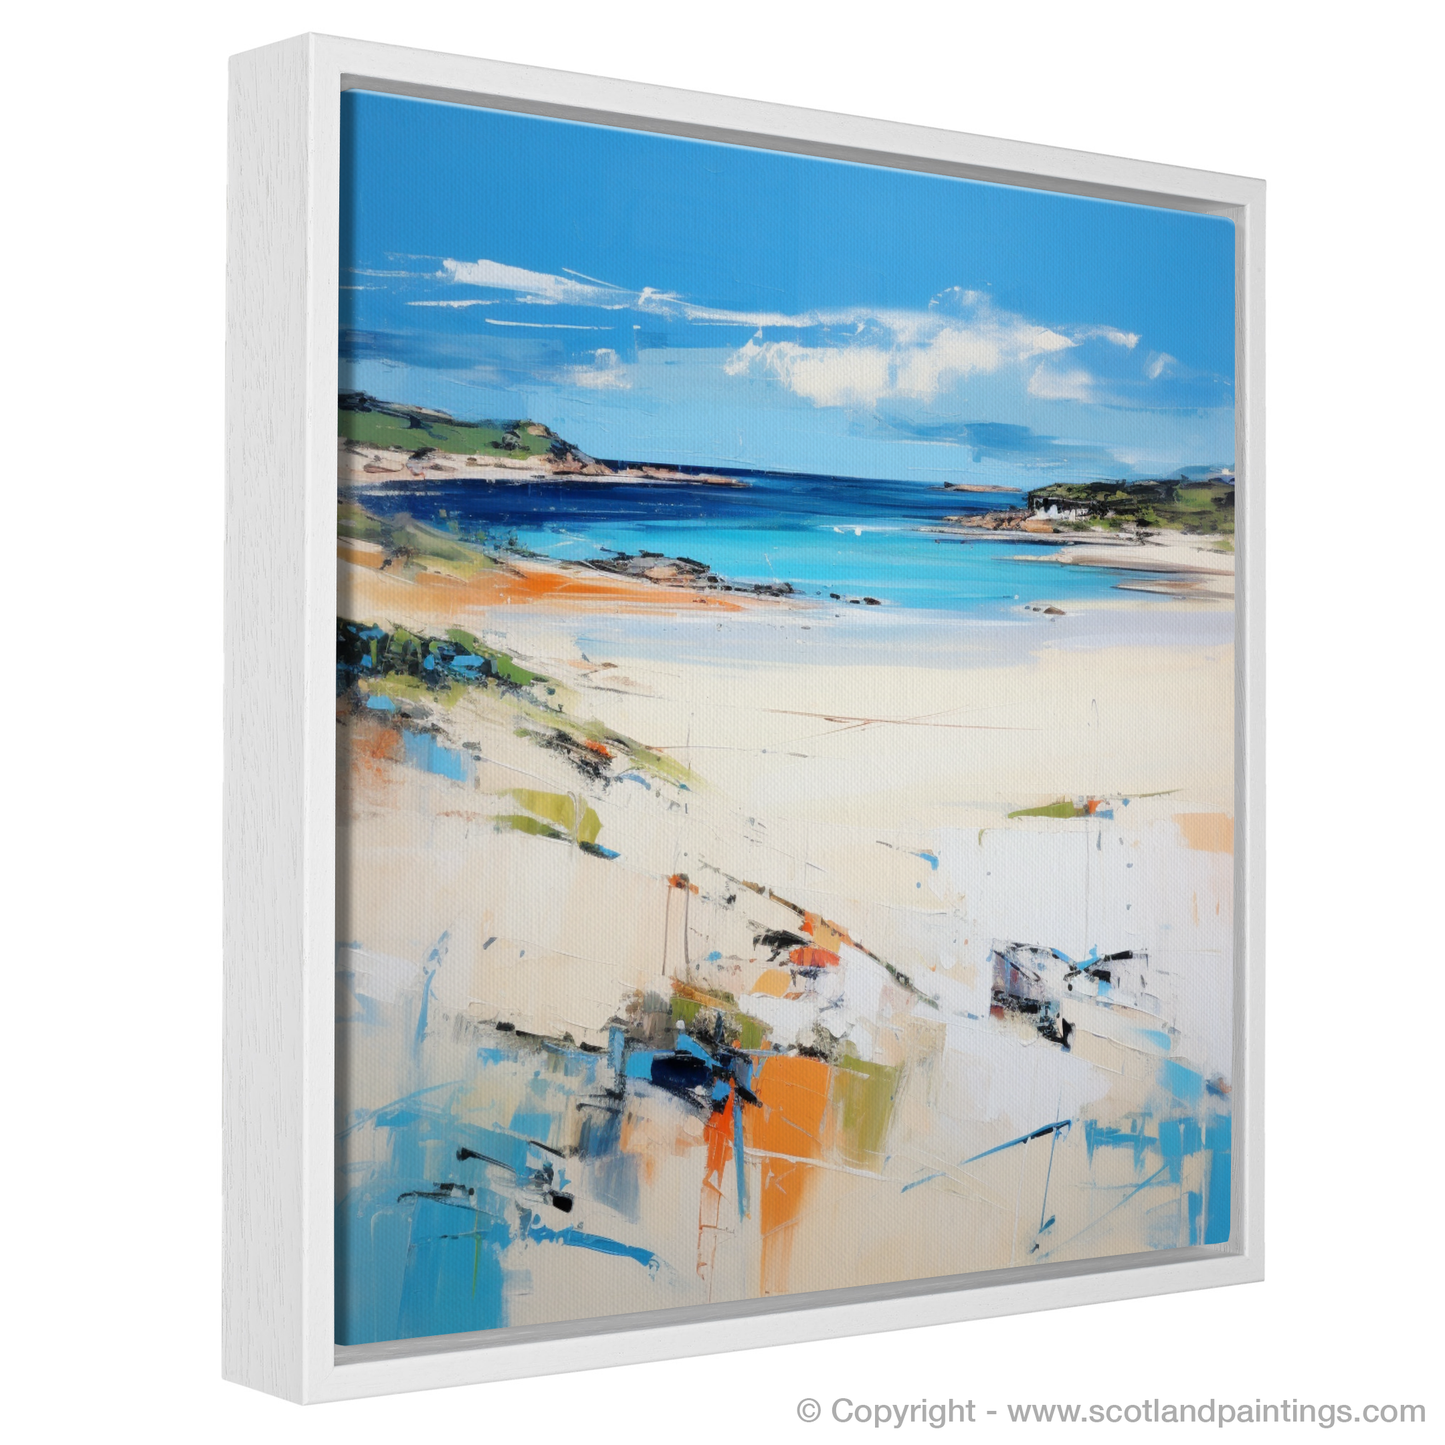 Painting and Art Print of Camusdarach Beach, Arisaig entitled "Camusdarach Beach Emotions in Colour: An Abstract Impressionist Journey".